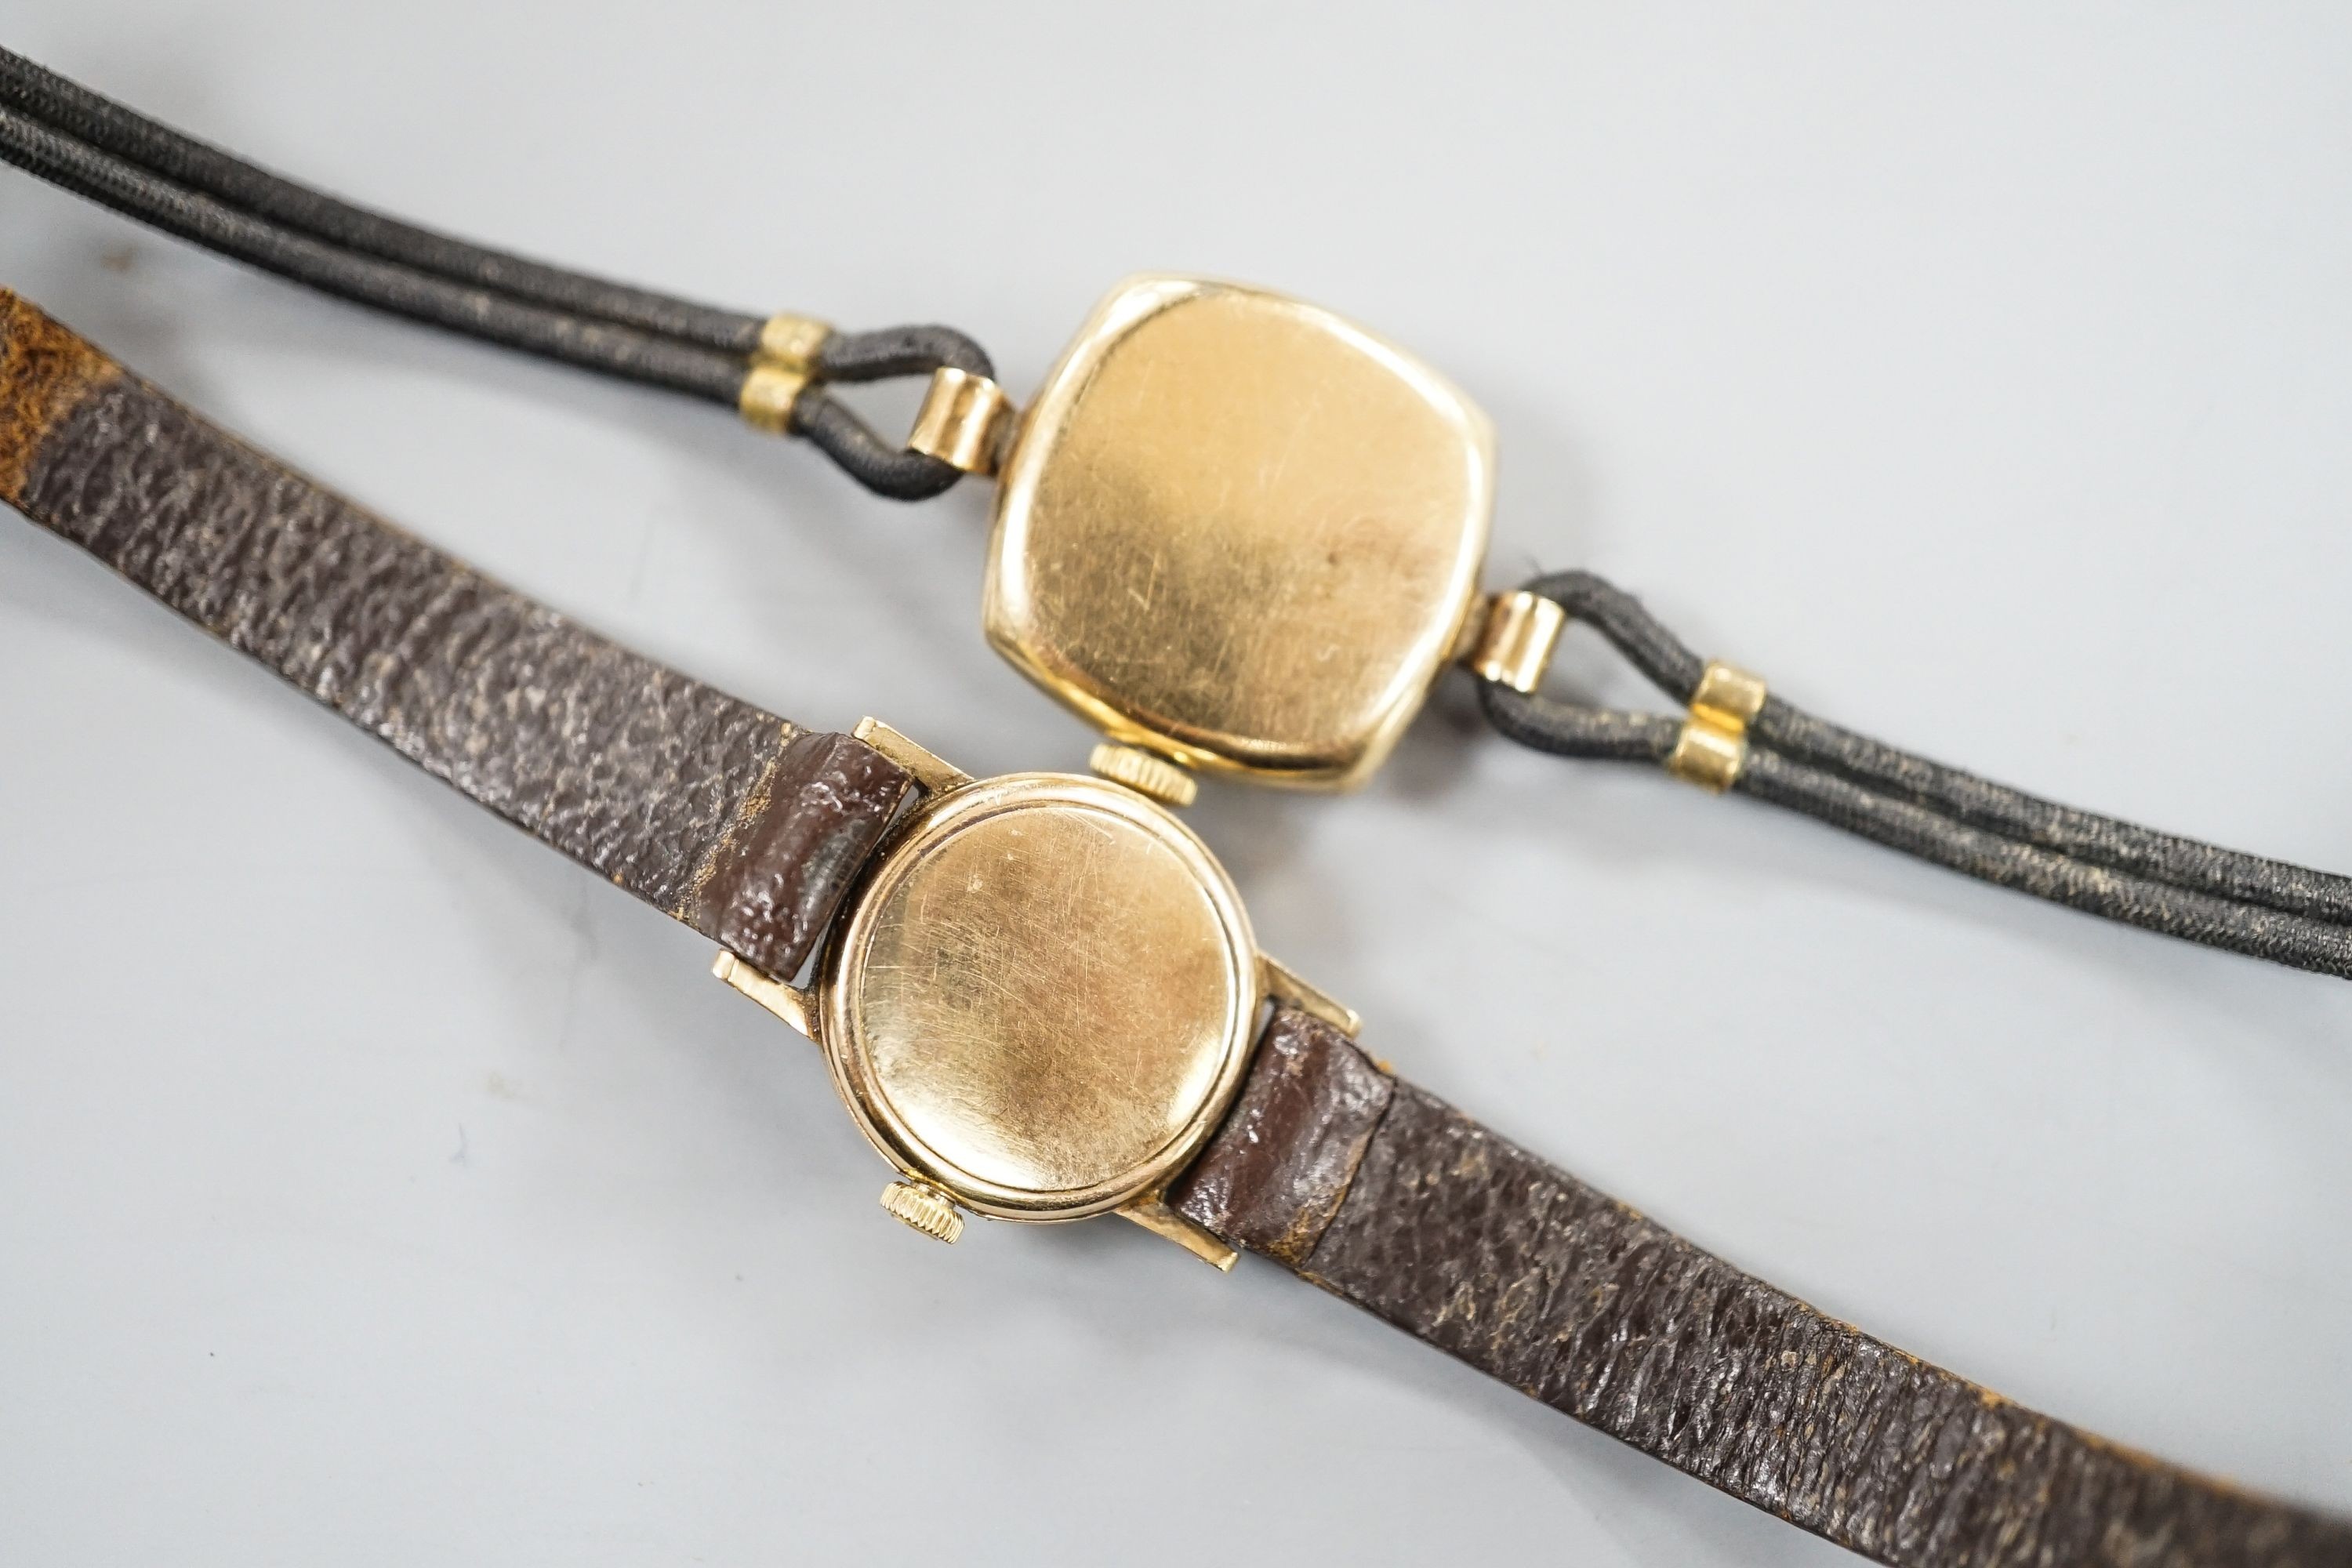 A lady's yellow metal Omega manual wind wrist watch, on leather strap and a similar 9ct Pinnacle watch.